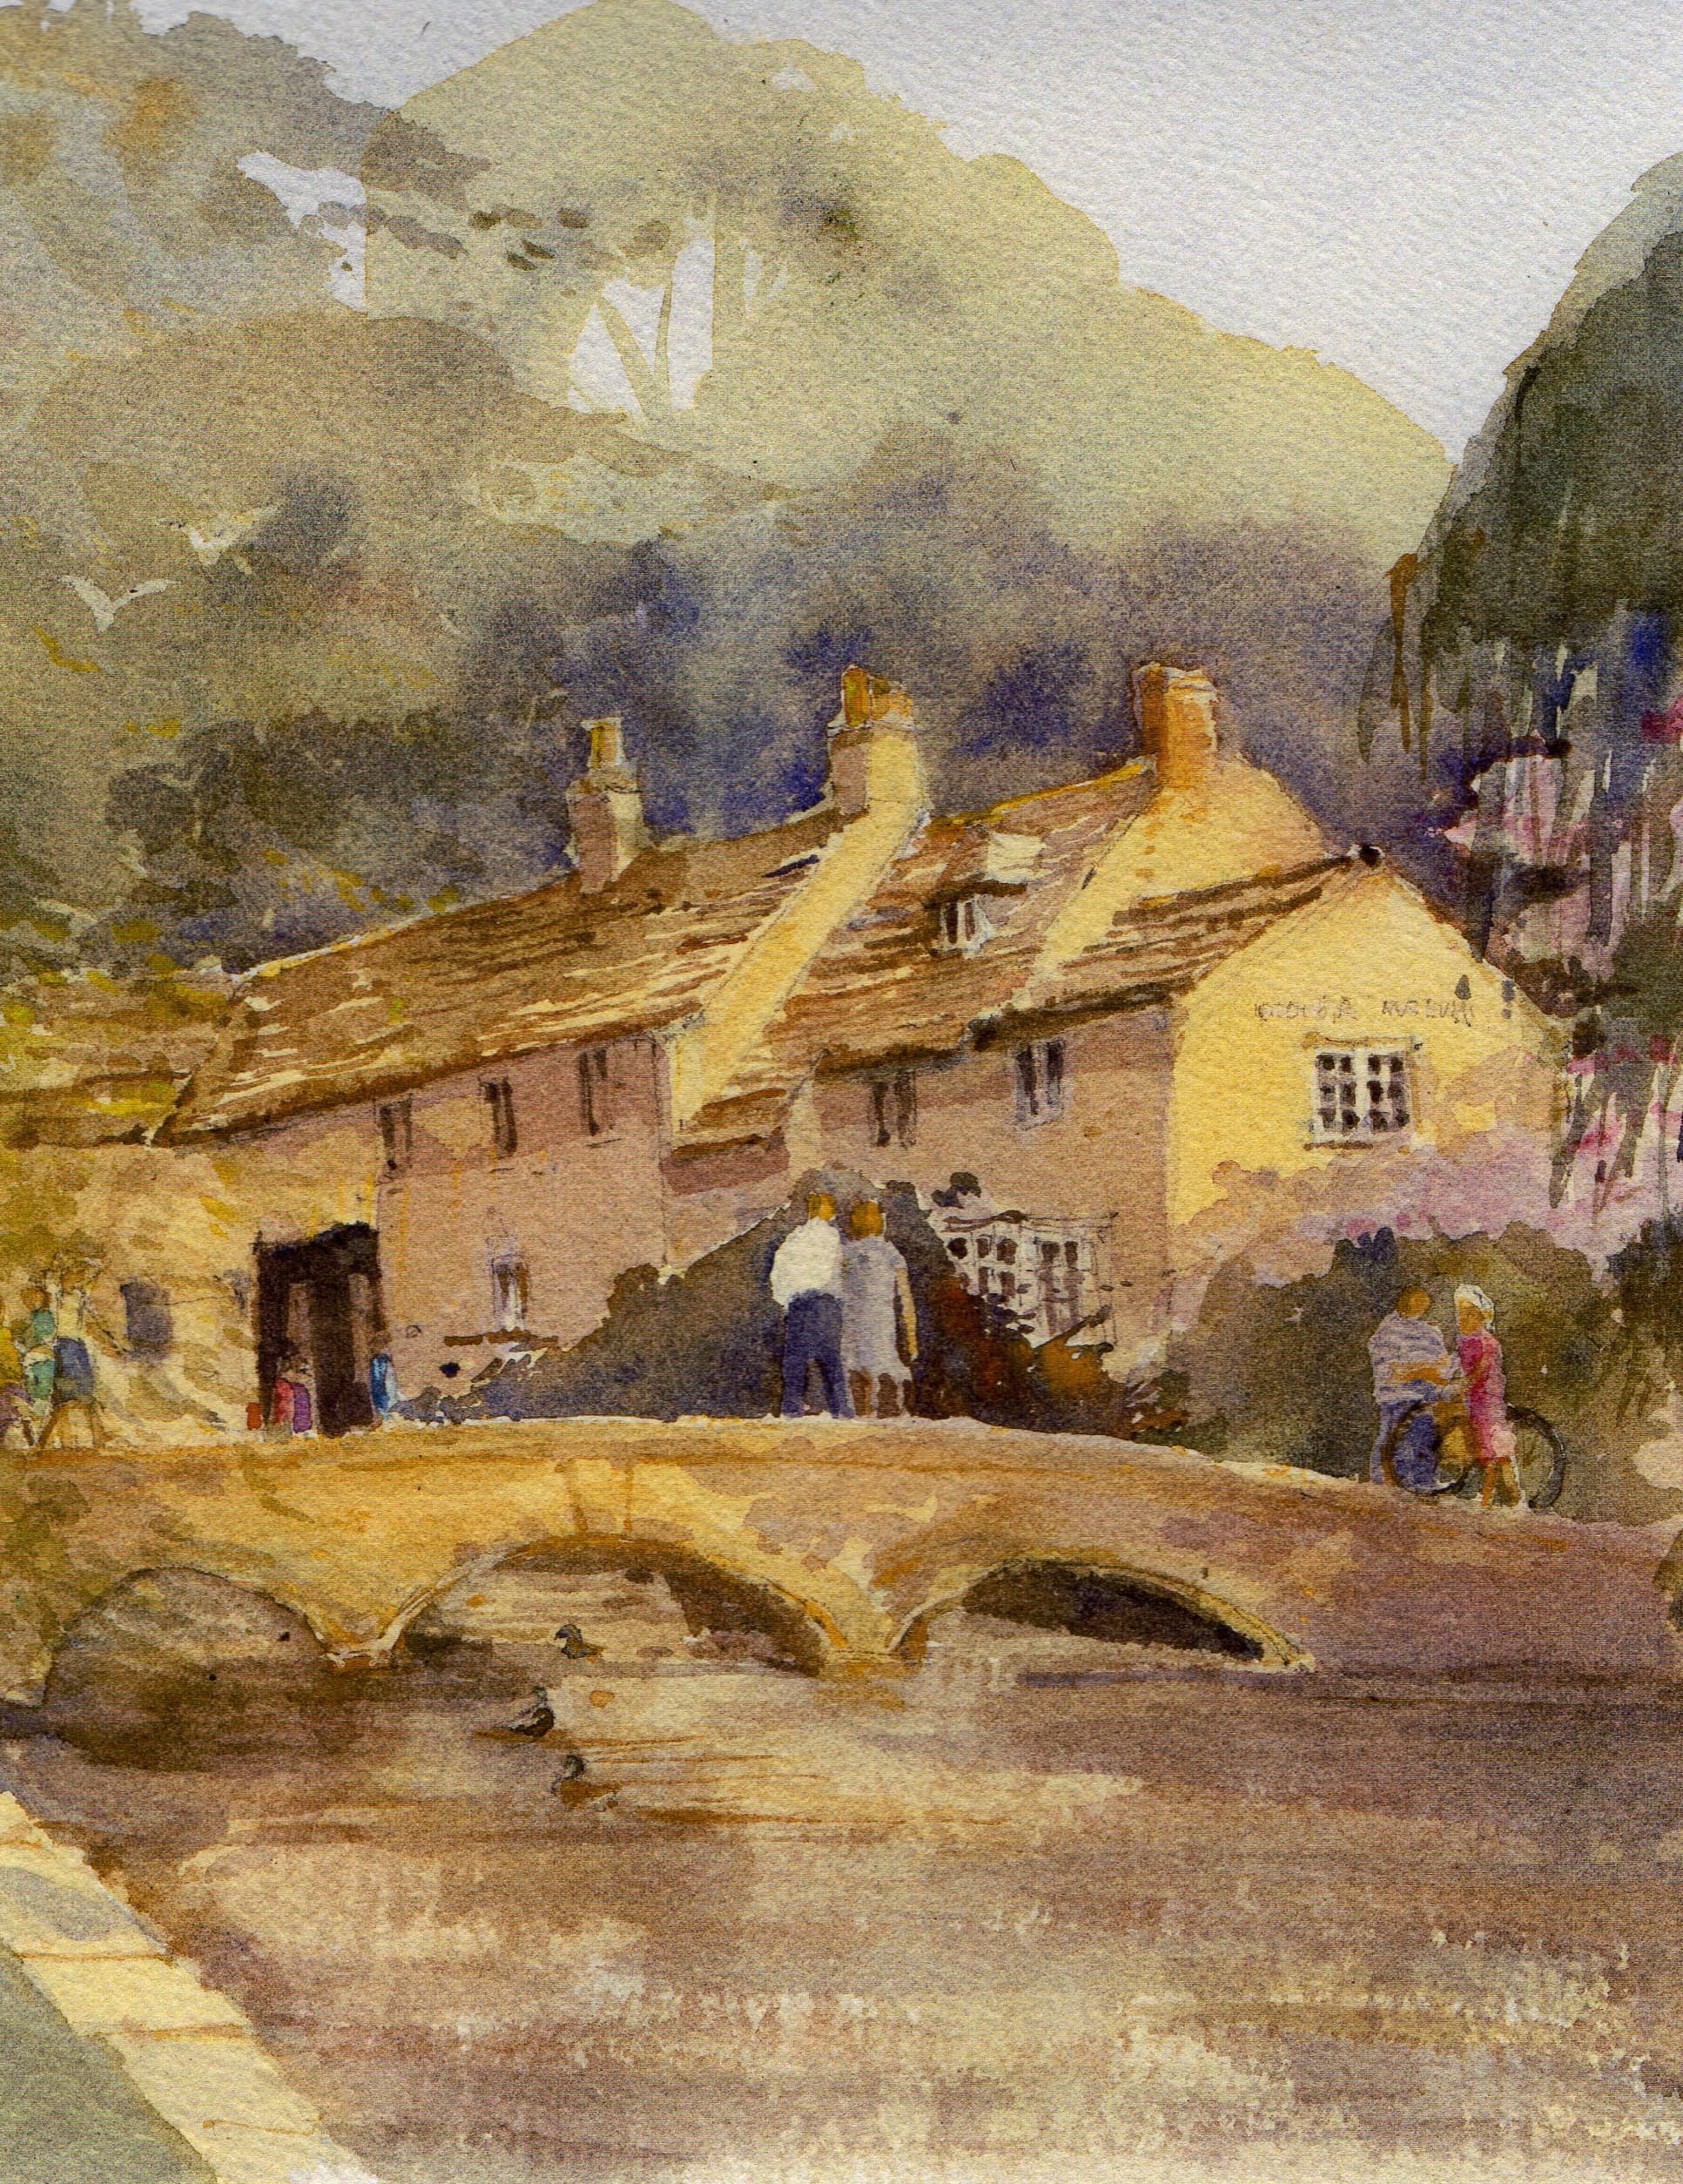 Bourton-on-the-Water (Print) by Elizabeth Chalmers